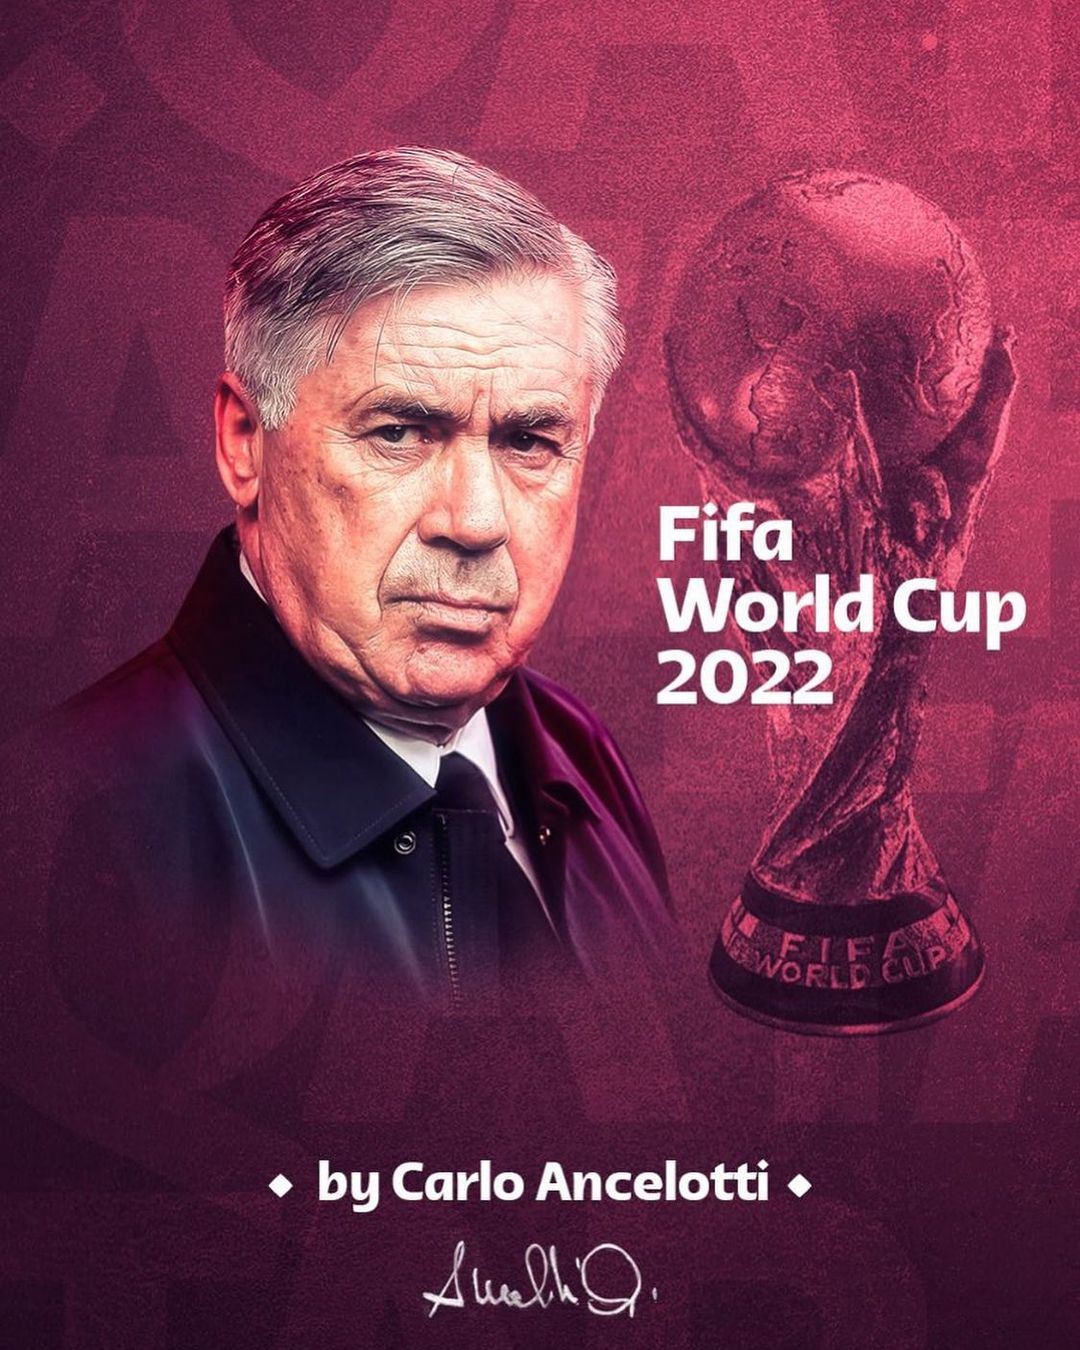 One of the top publications of @mrancelotti which has 295.1K likes and 776 comments